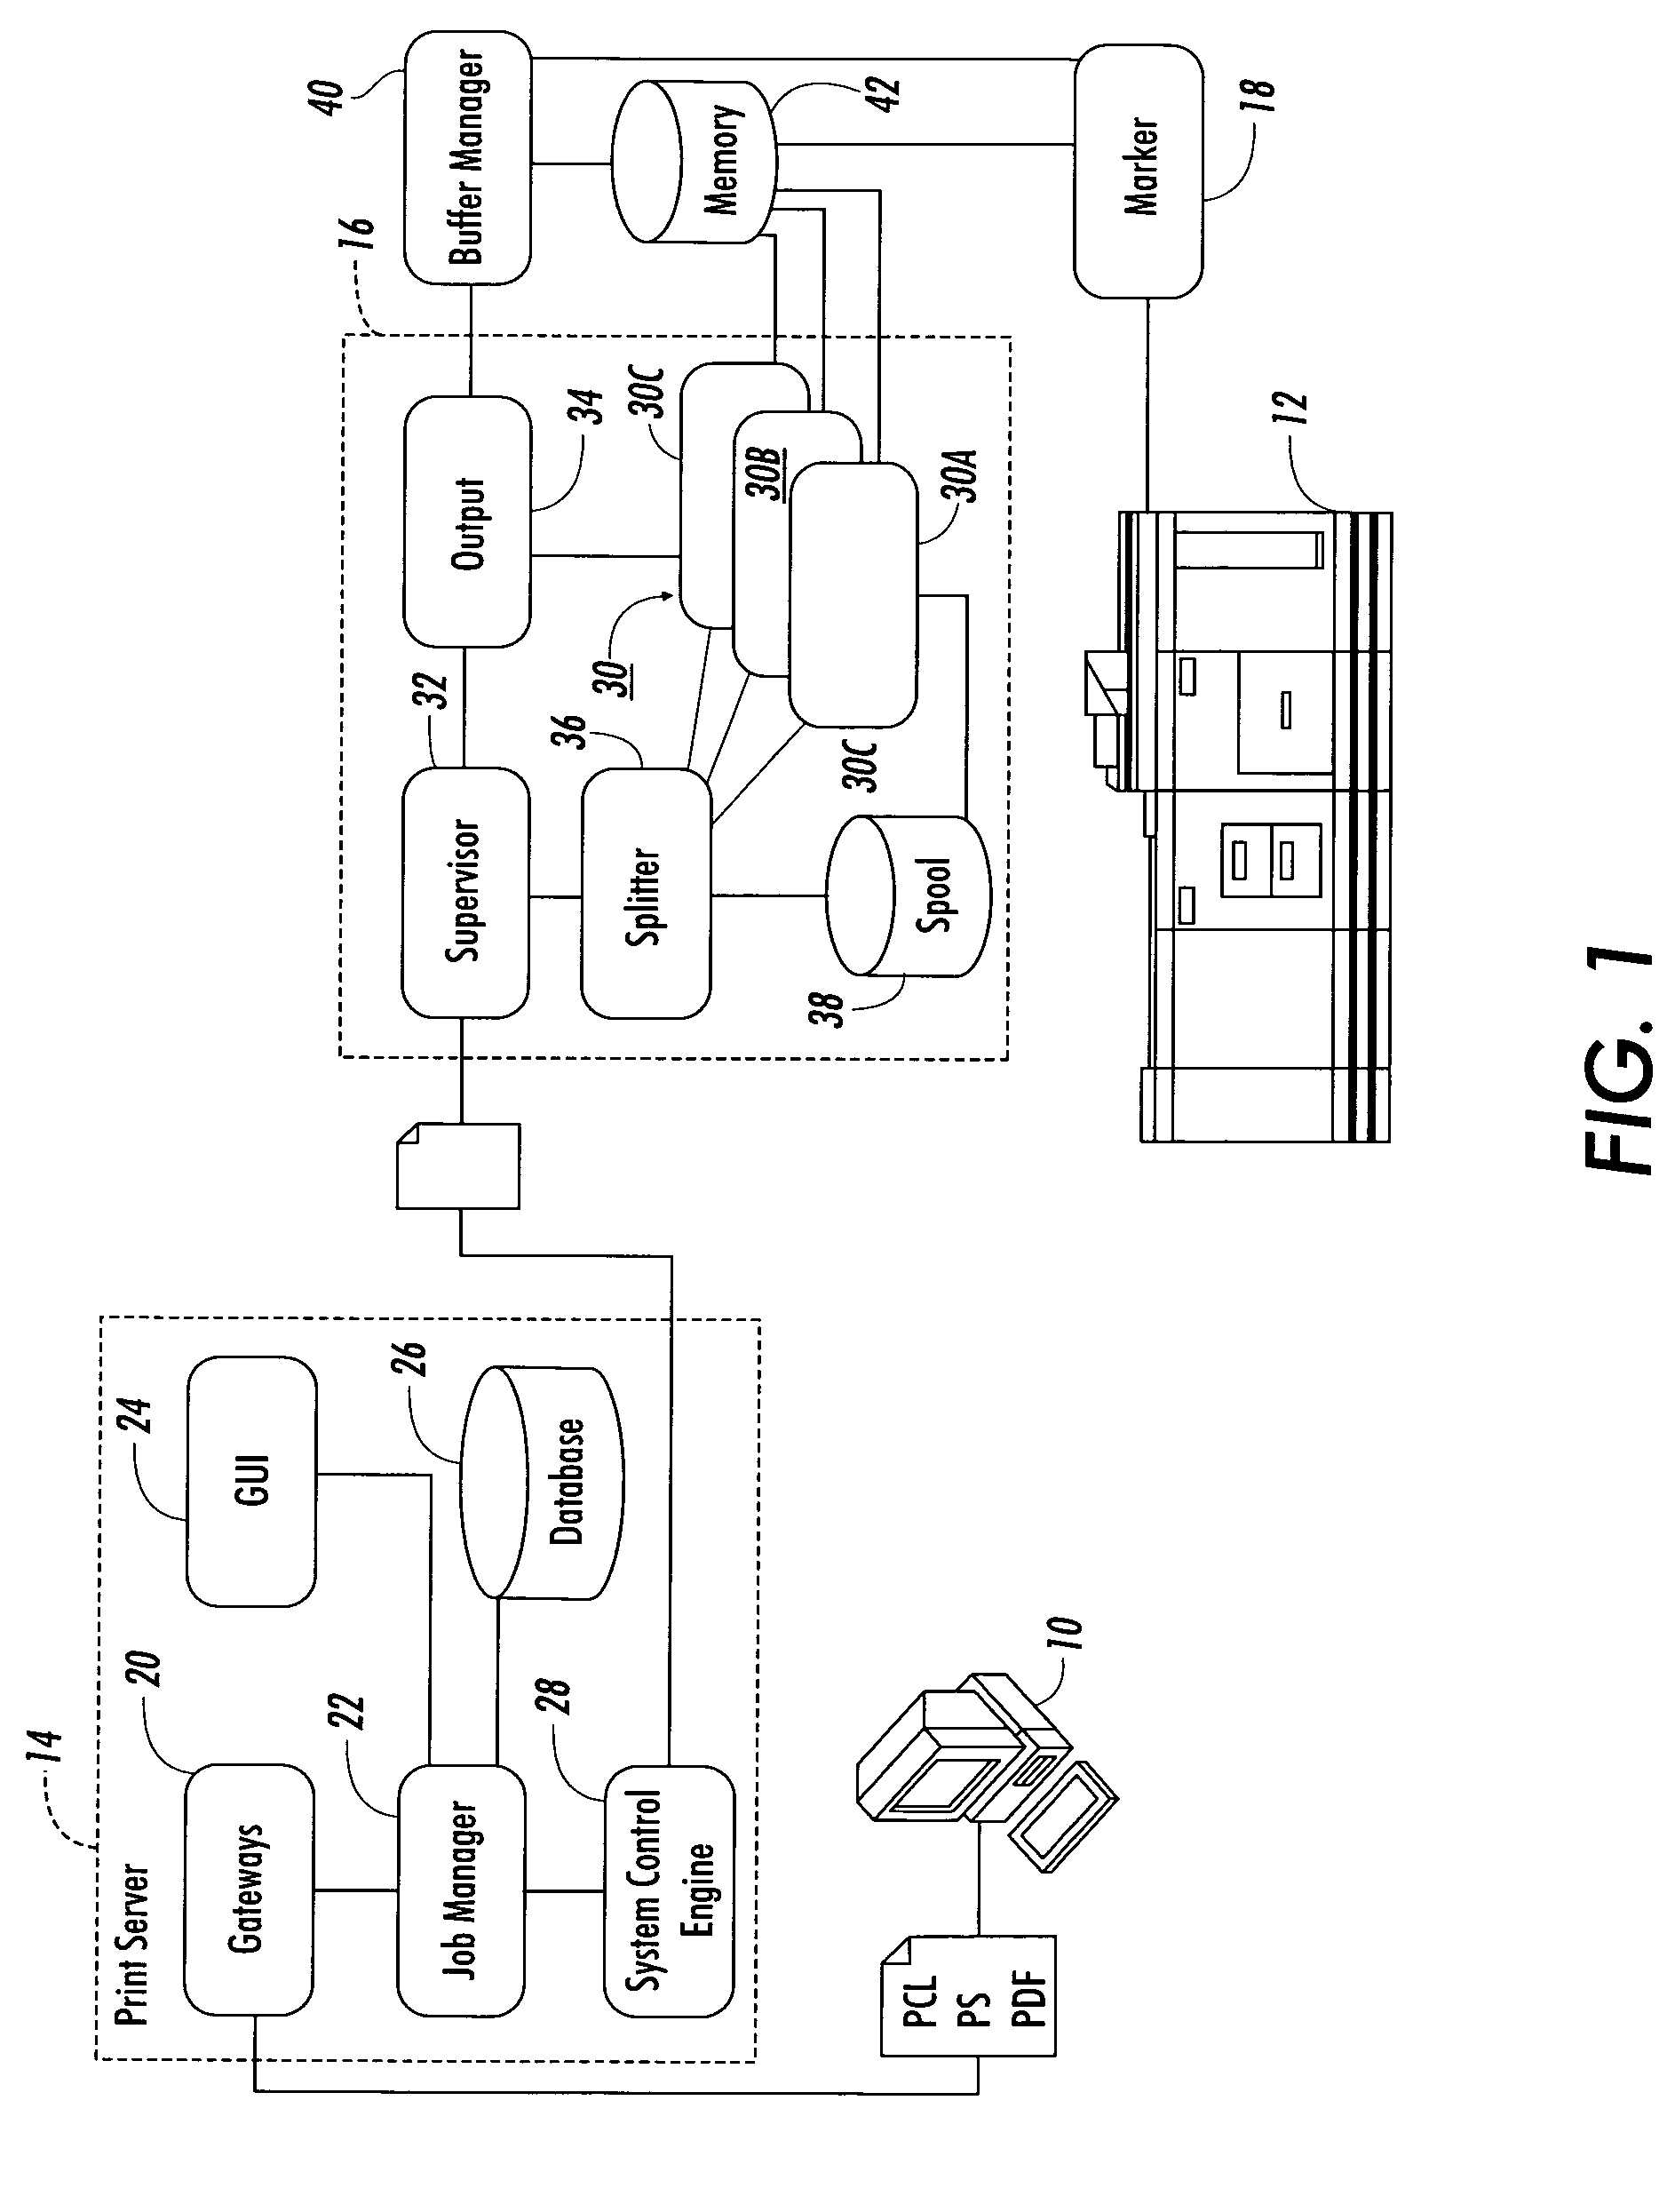 Parallel printing system having modes for auto-recovery, auto-discovery of resources, and parallel processing of unprotected postscript jobs